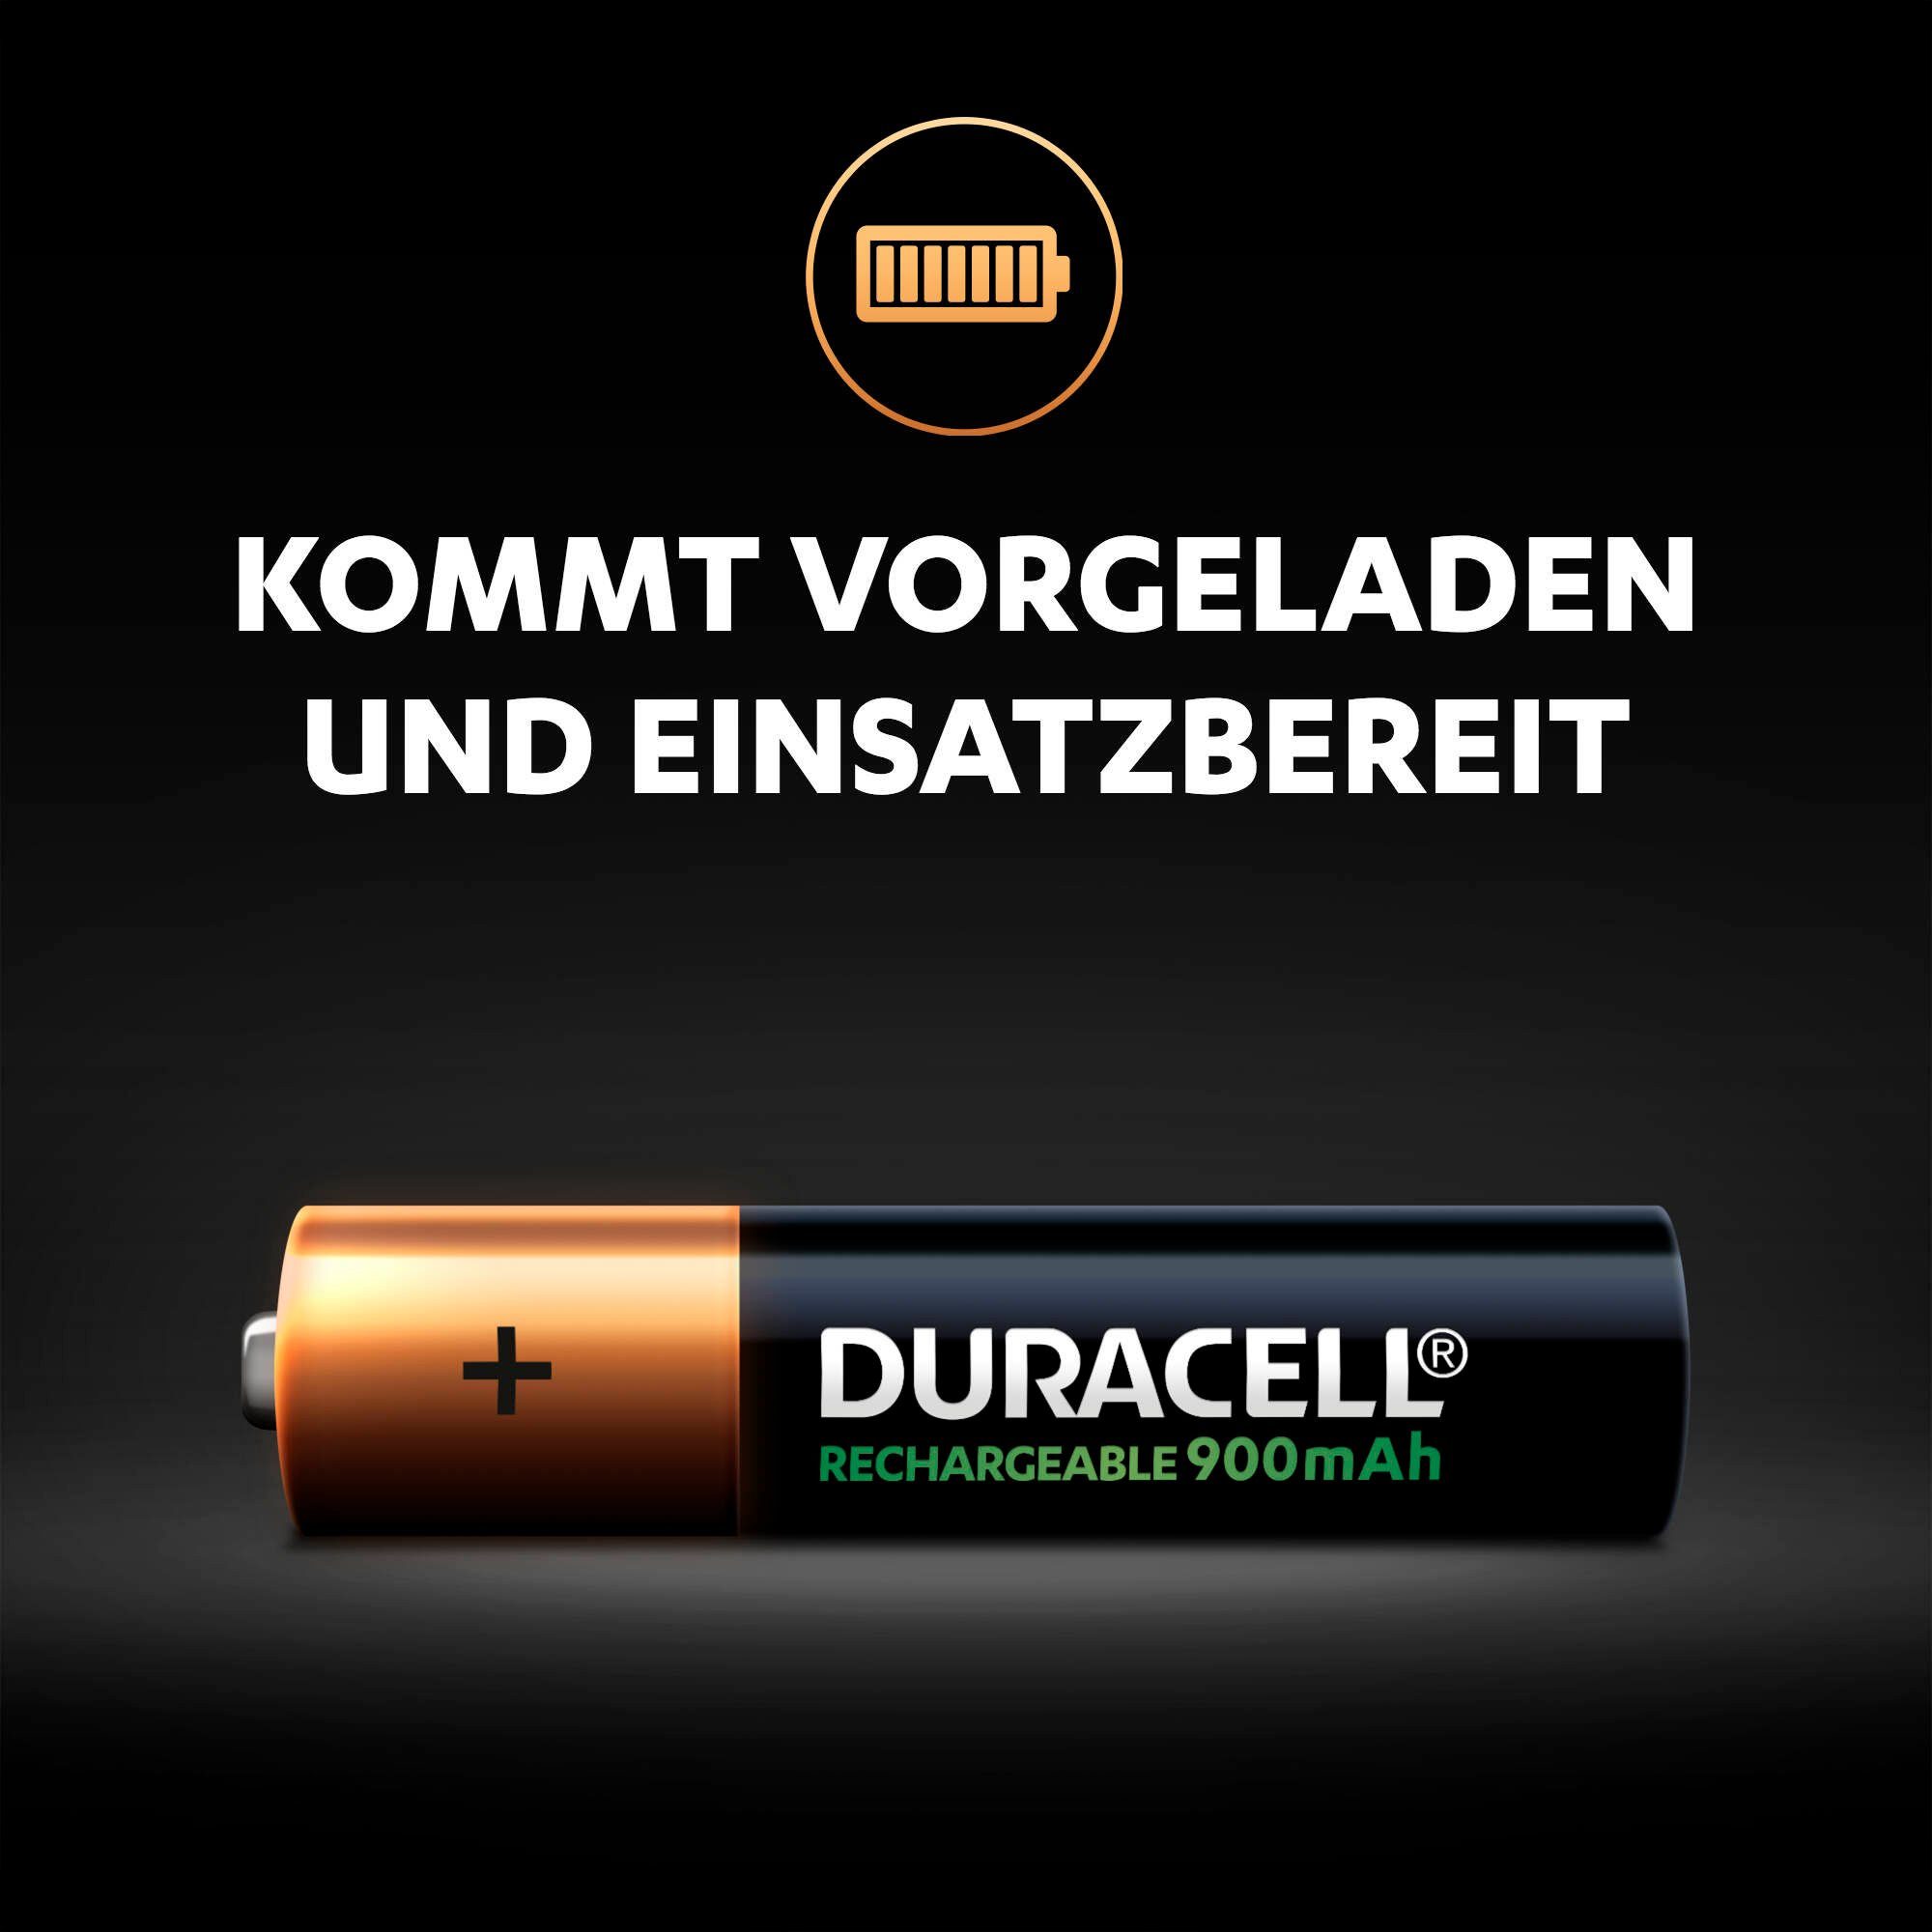 Rechargeable 900mAh 4er Duracell St) (4 Batterie, AAA Pack